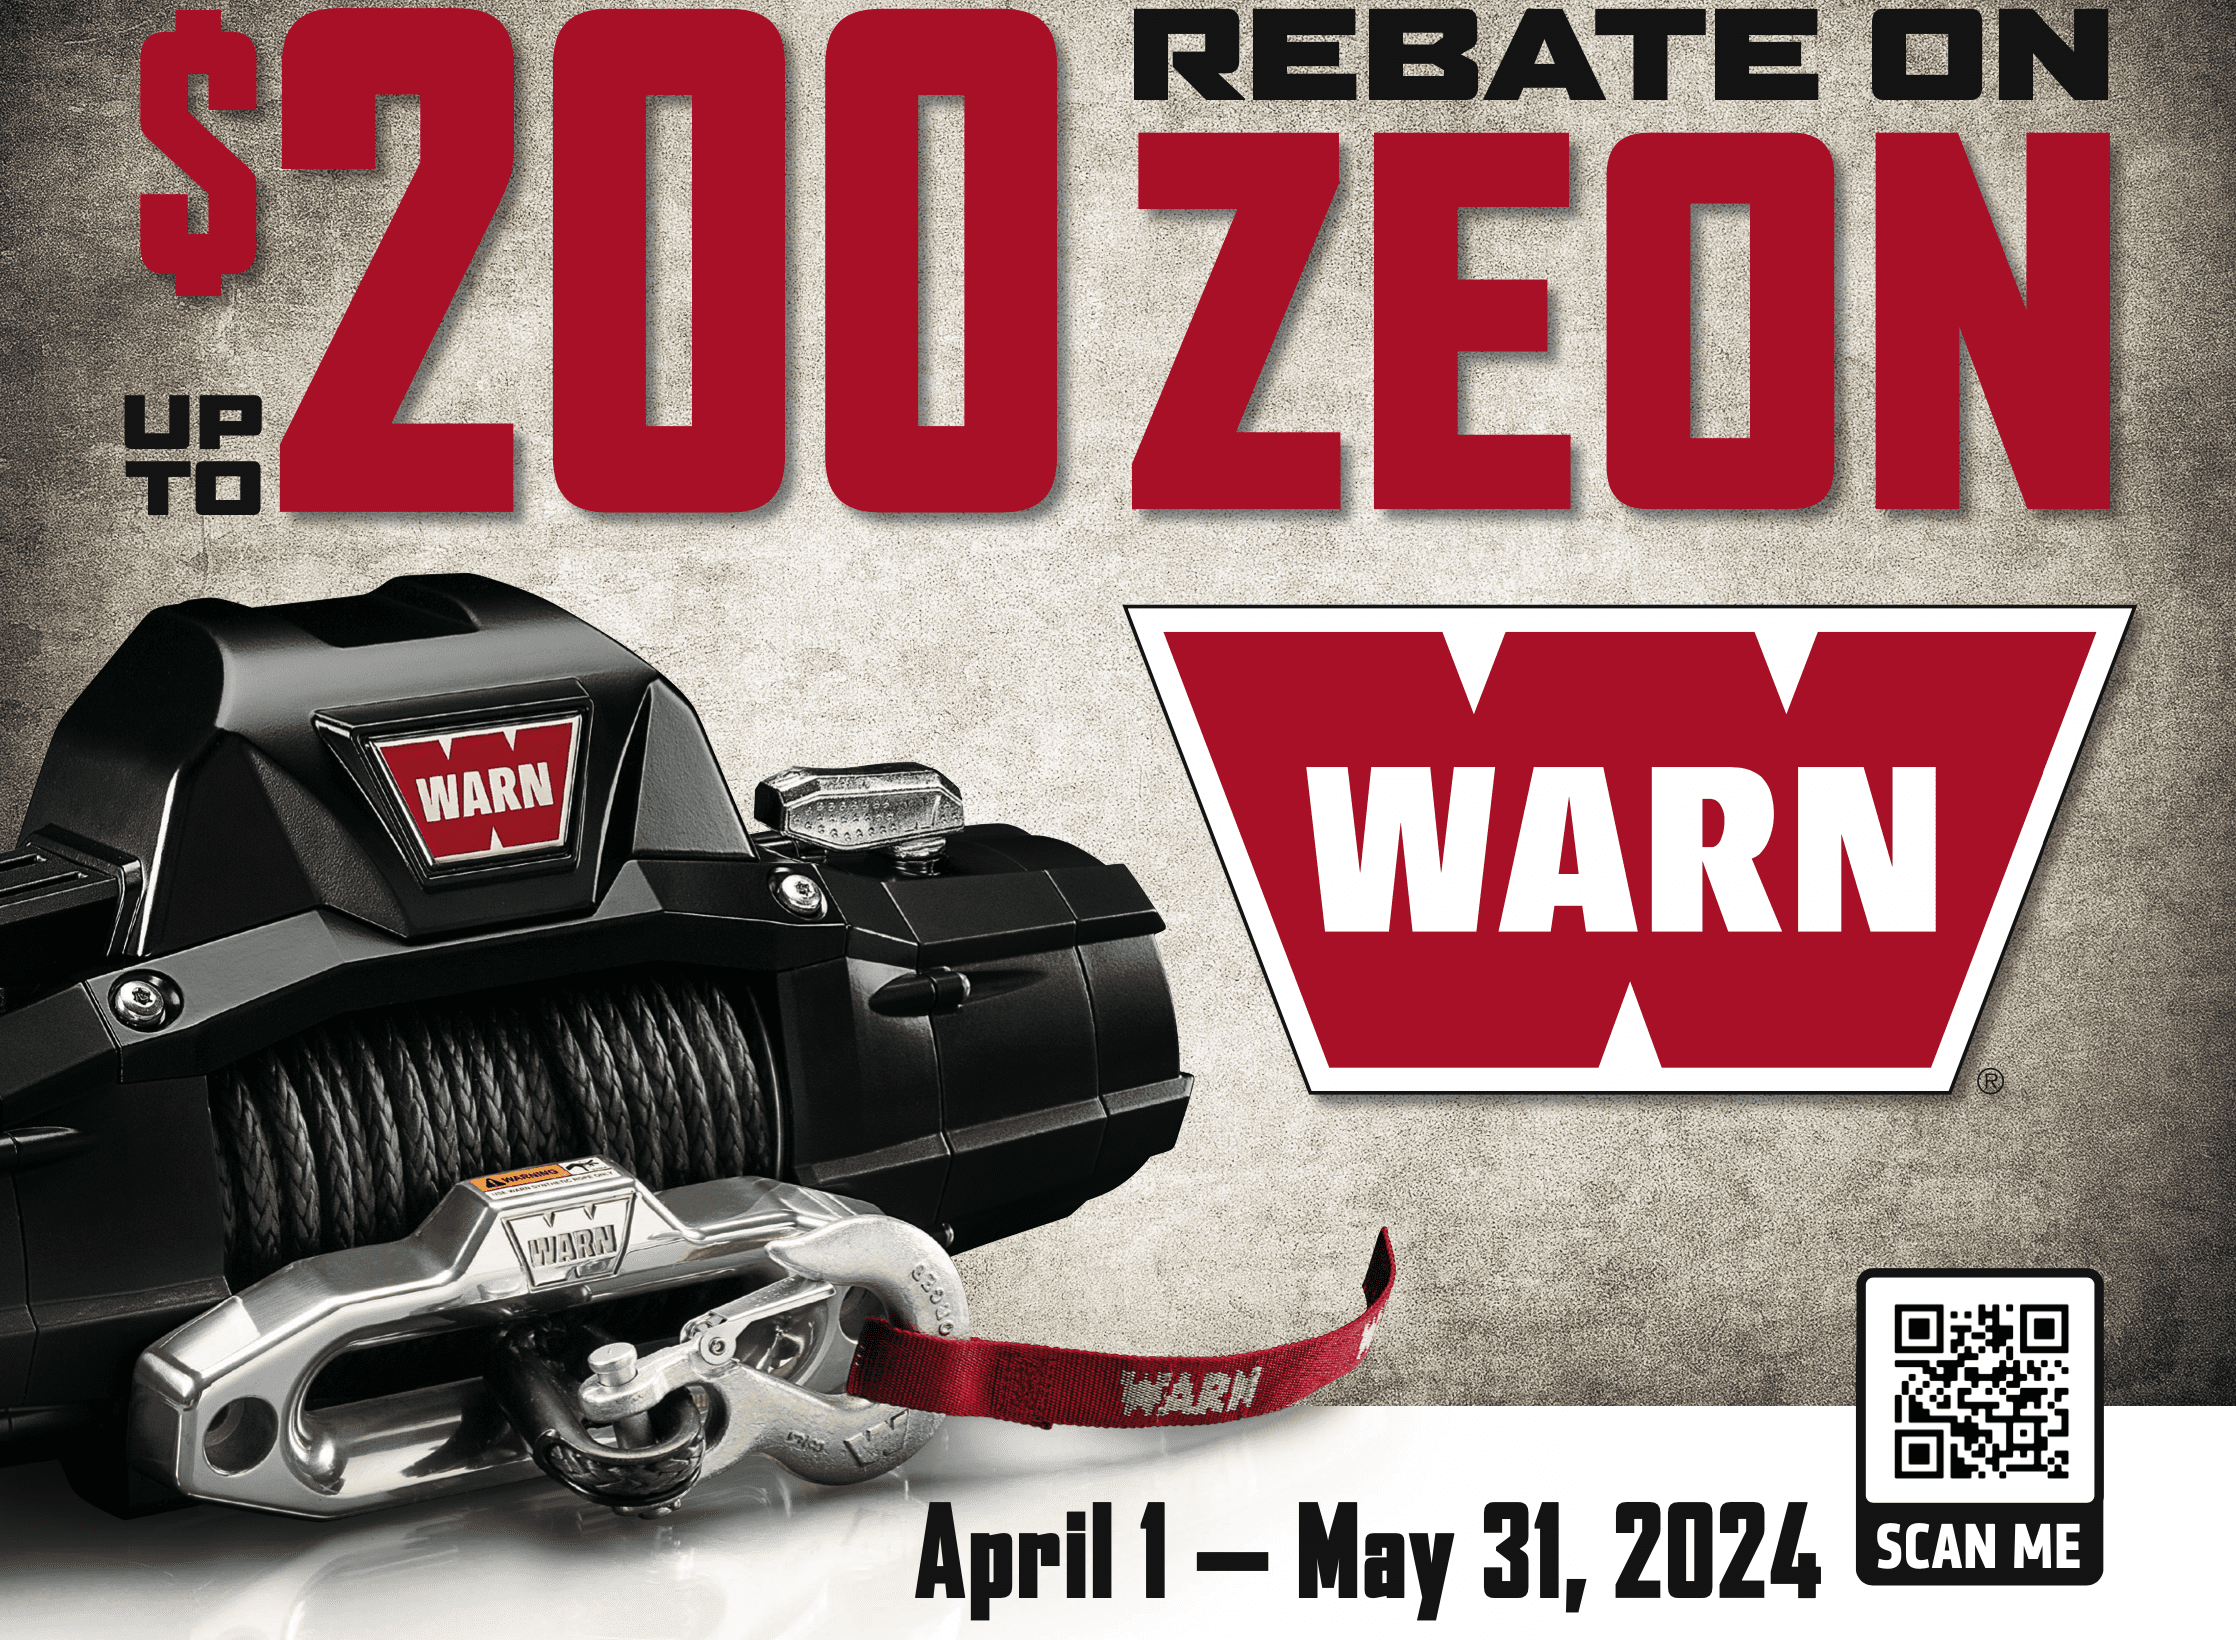 Up to $200 Rebate on Warn ZEON Winches from Nomadic Supply Company!